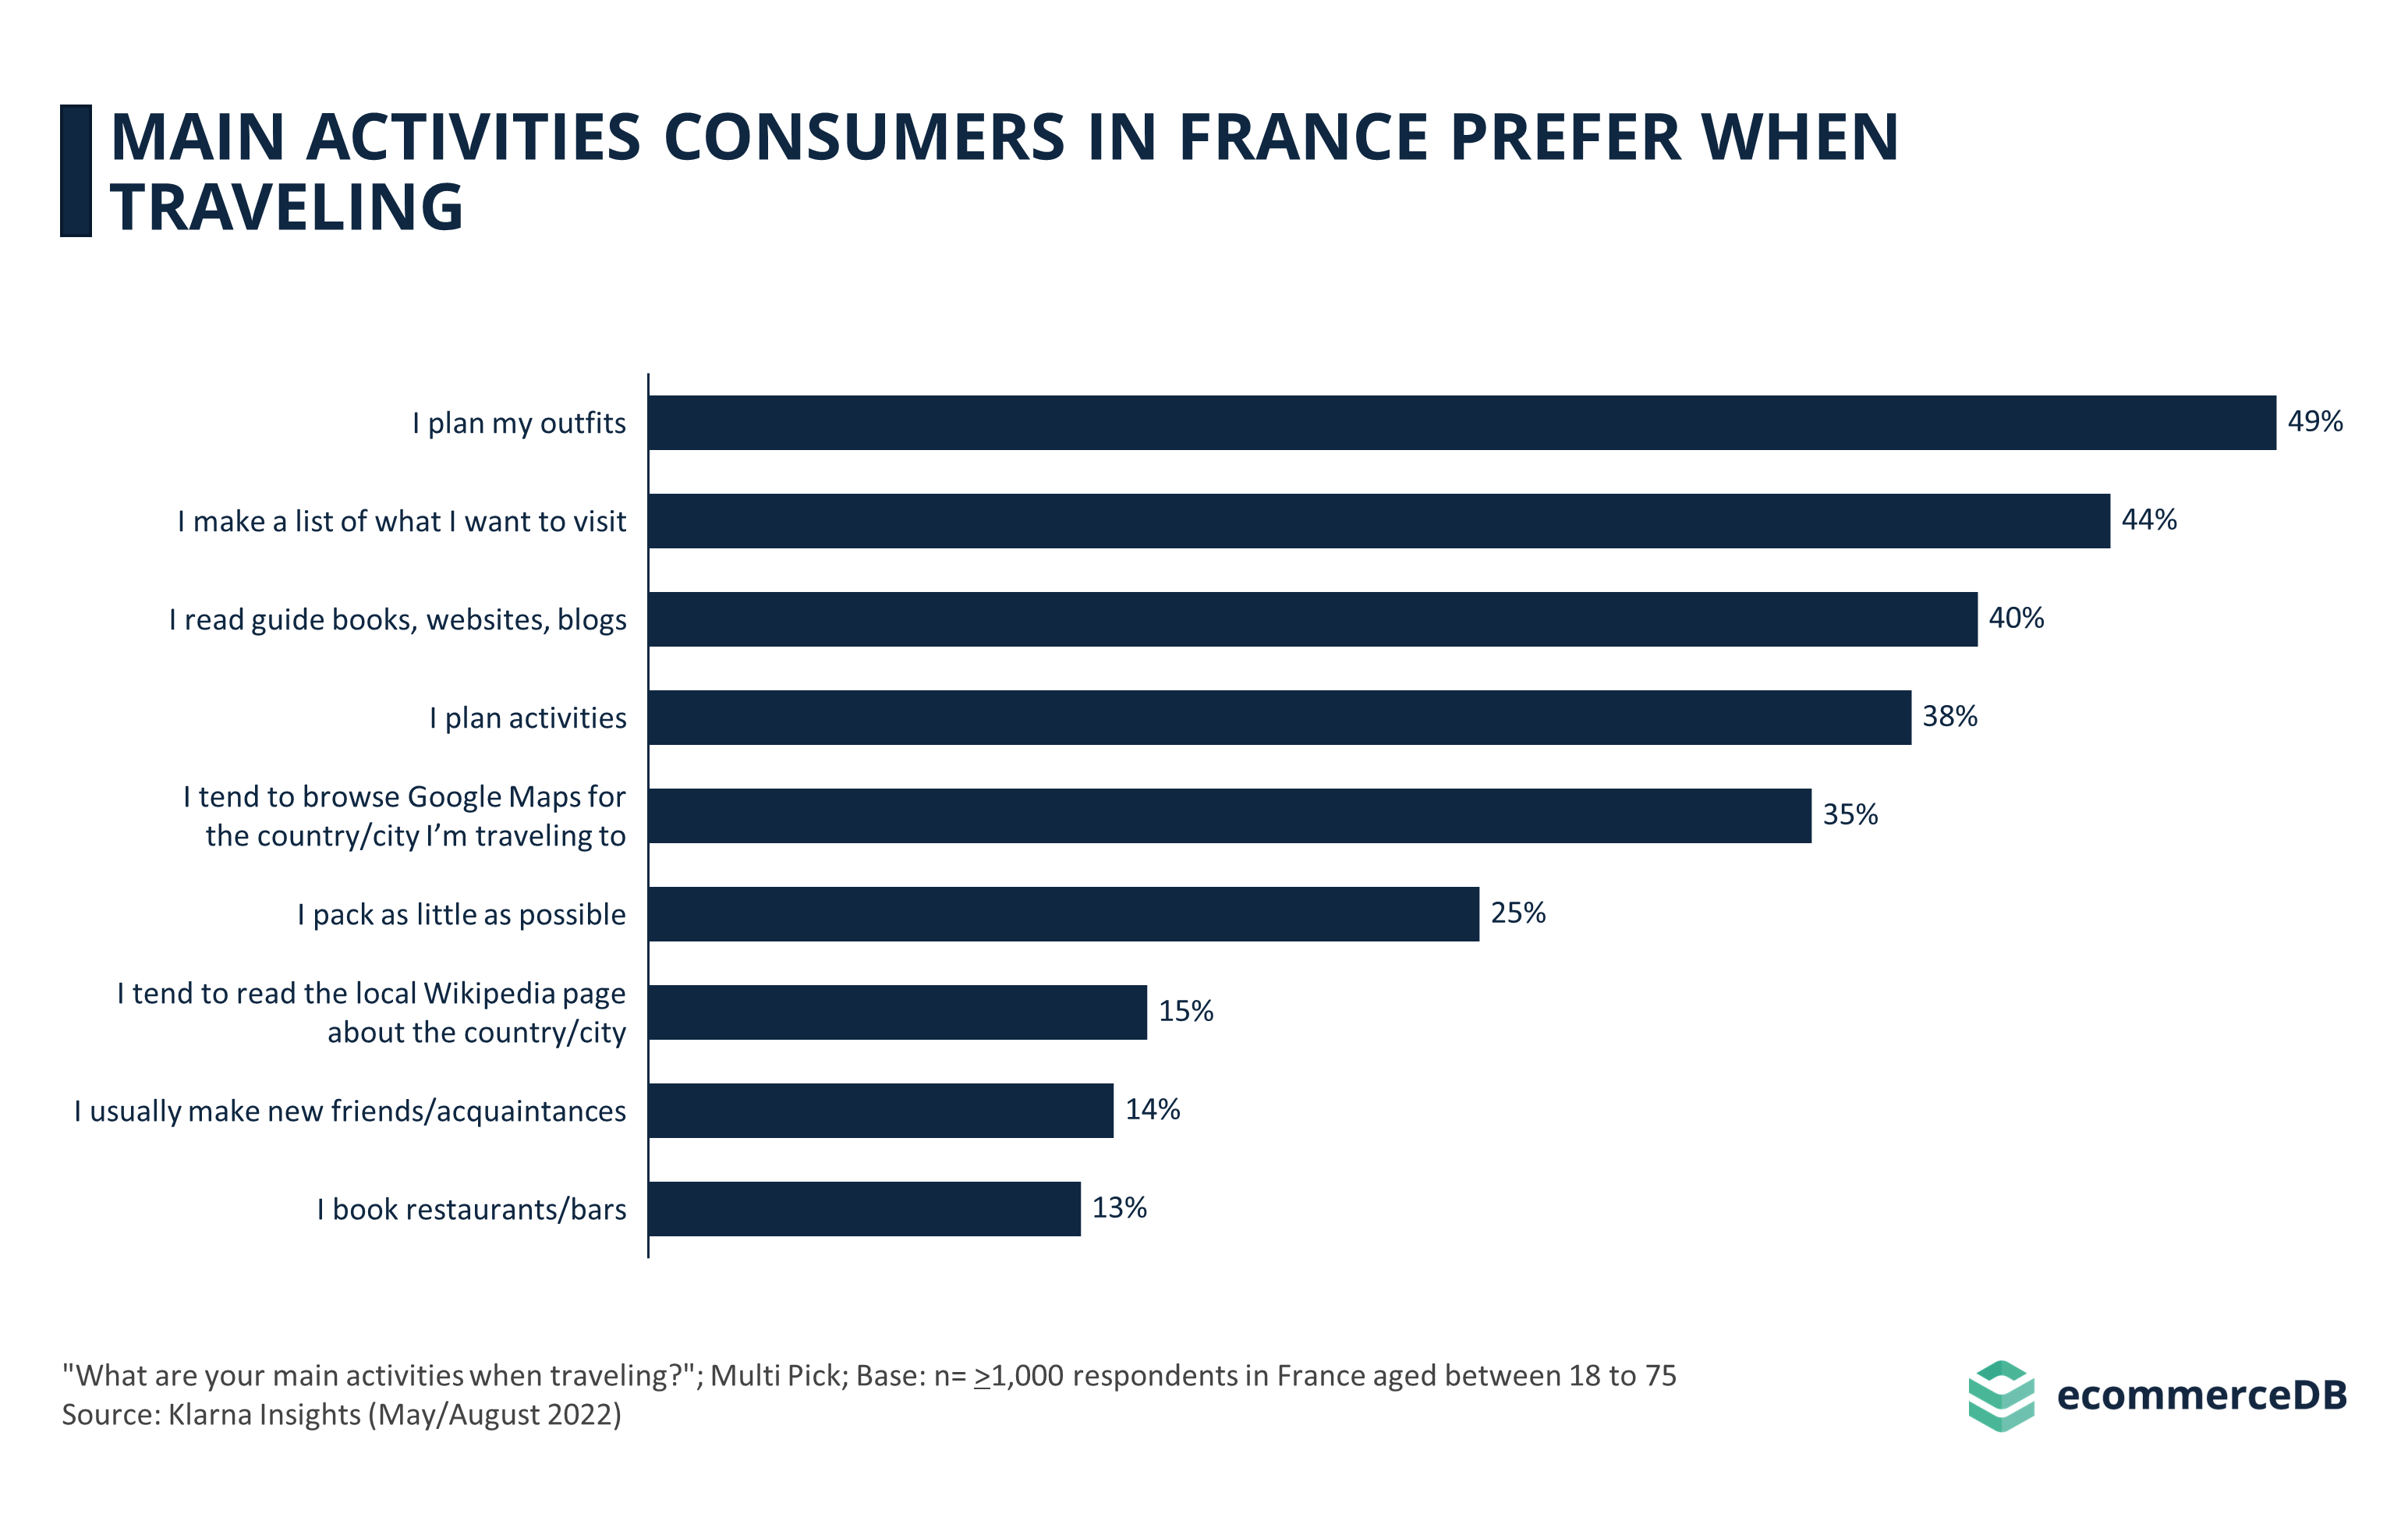 Main Activities When Traveling of Consumers in France